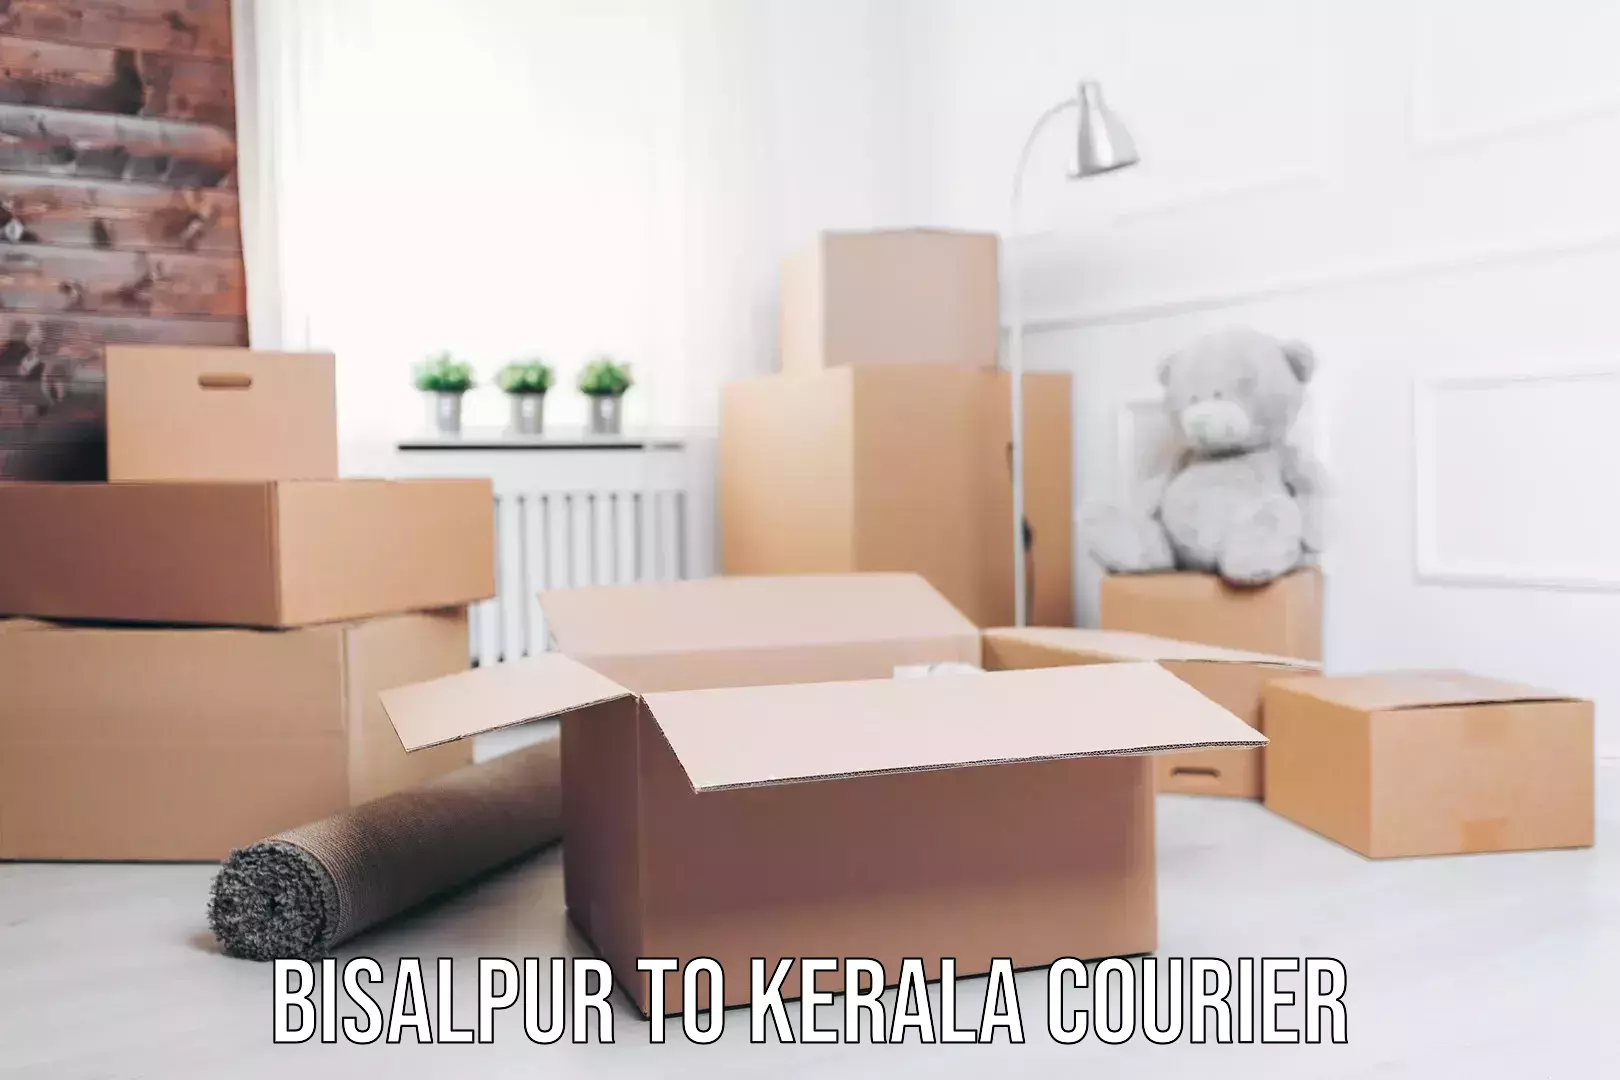 Local delivery service Bisalpur to Kerala